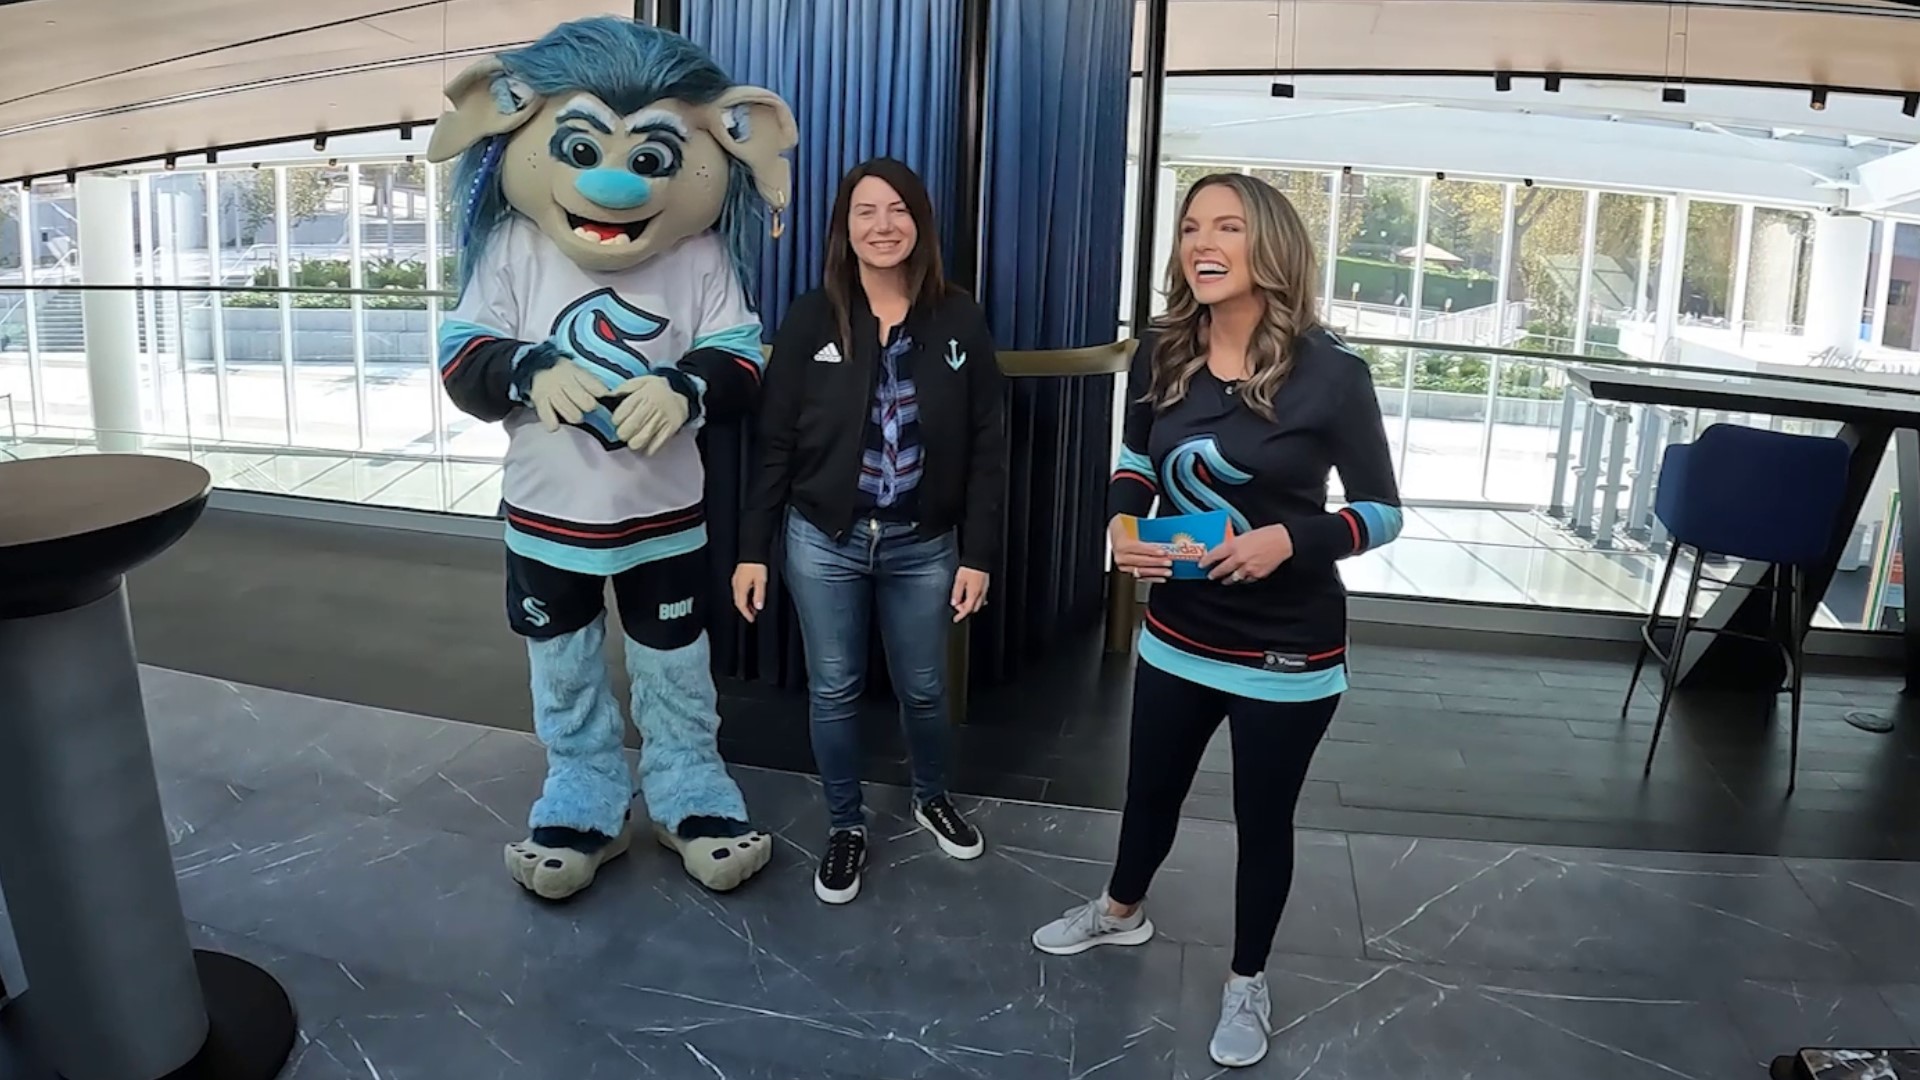 We chat with Kraken Senior Vice President of Marketing Katie Townsend and their new mascot Buoy about what fans can expect this hockey season! #newdaynw